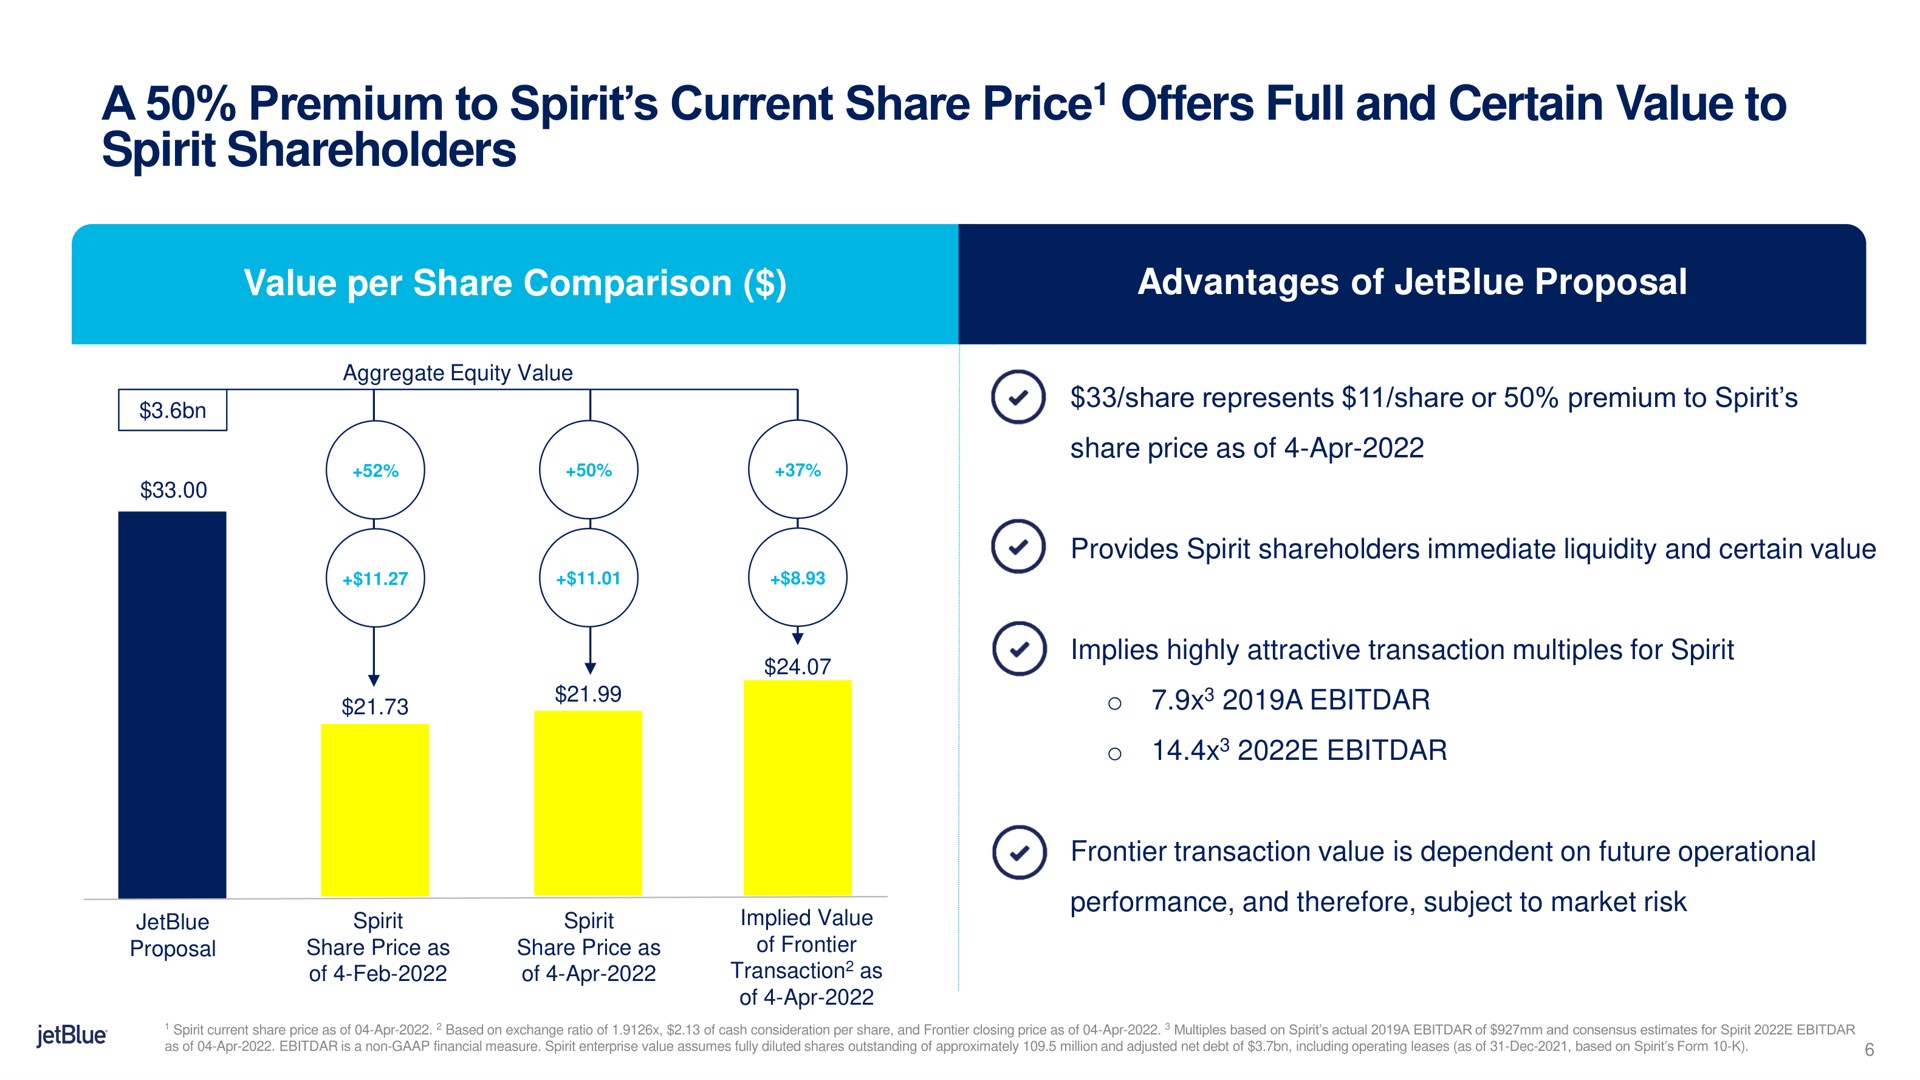 a premium to spirit current share price offers full and certain value to spirit shareholders price | jetBlue